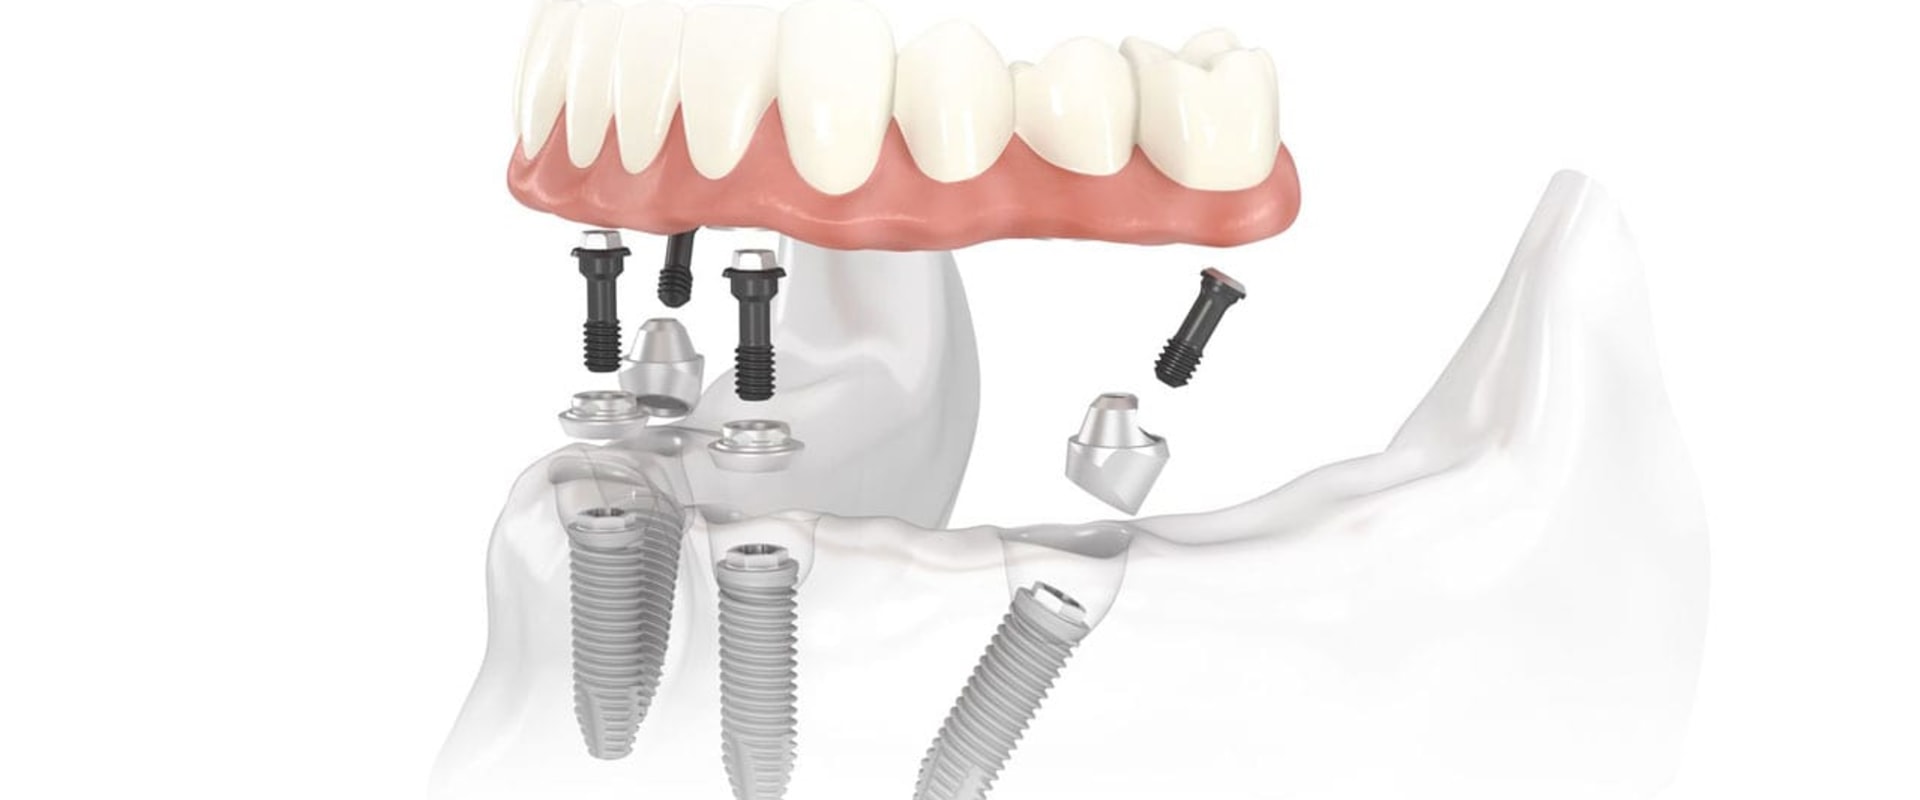 How Long Does it Take to Get All-on-Four Dental Implants?